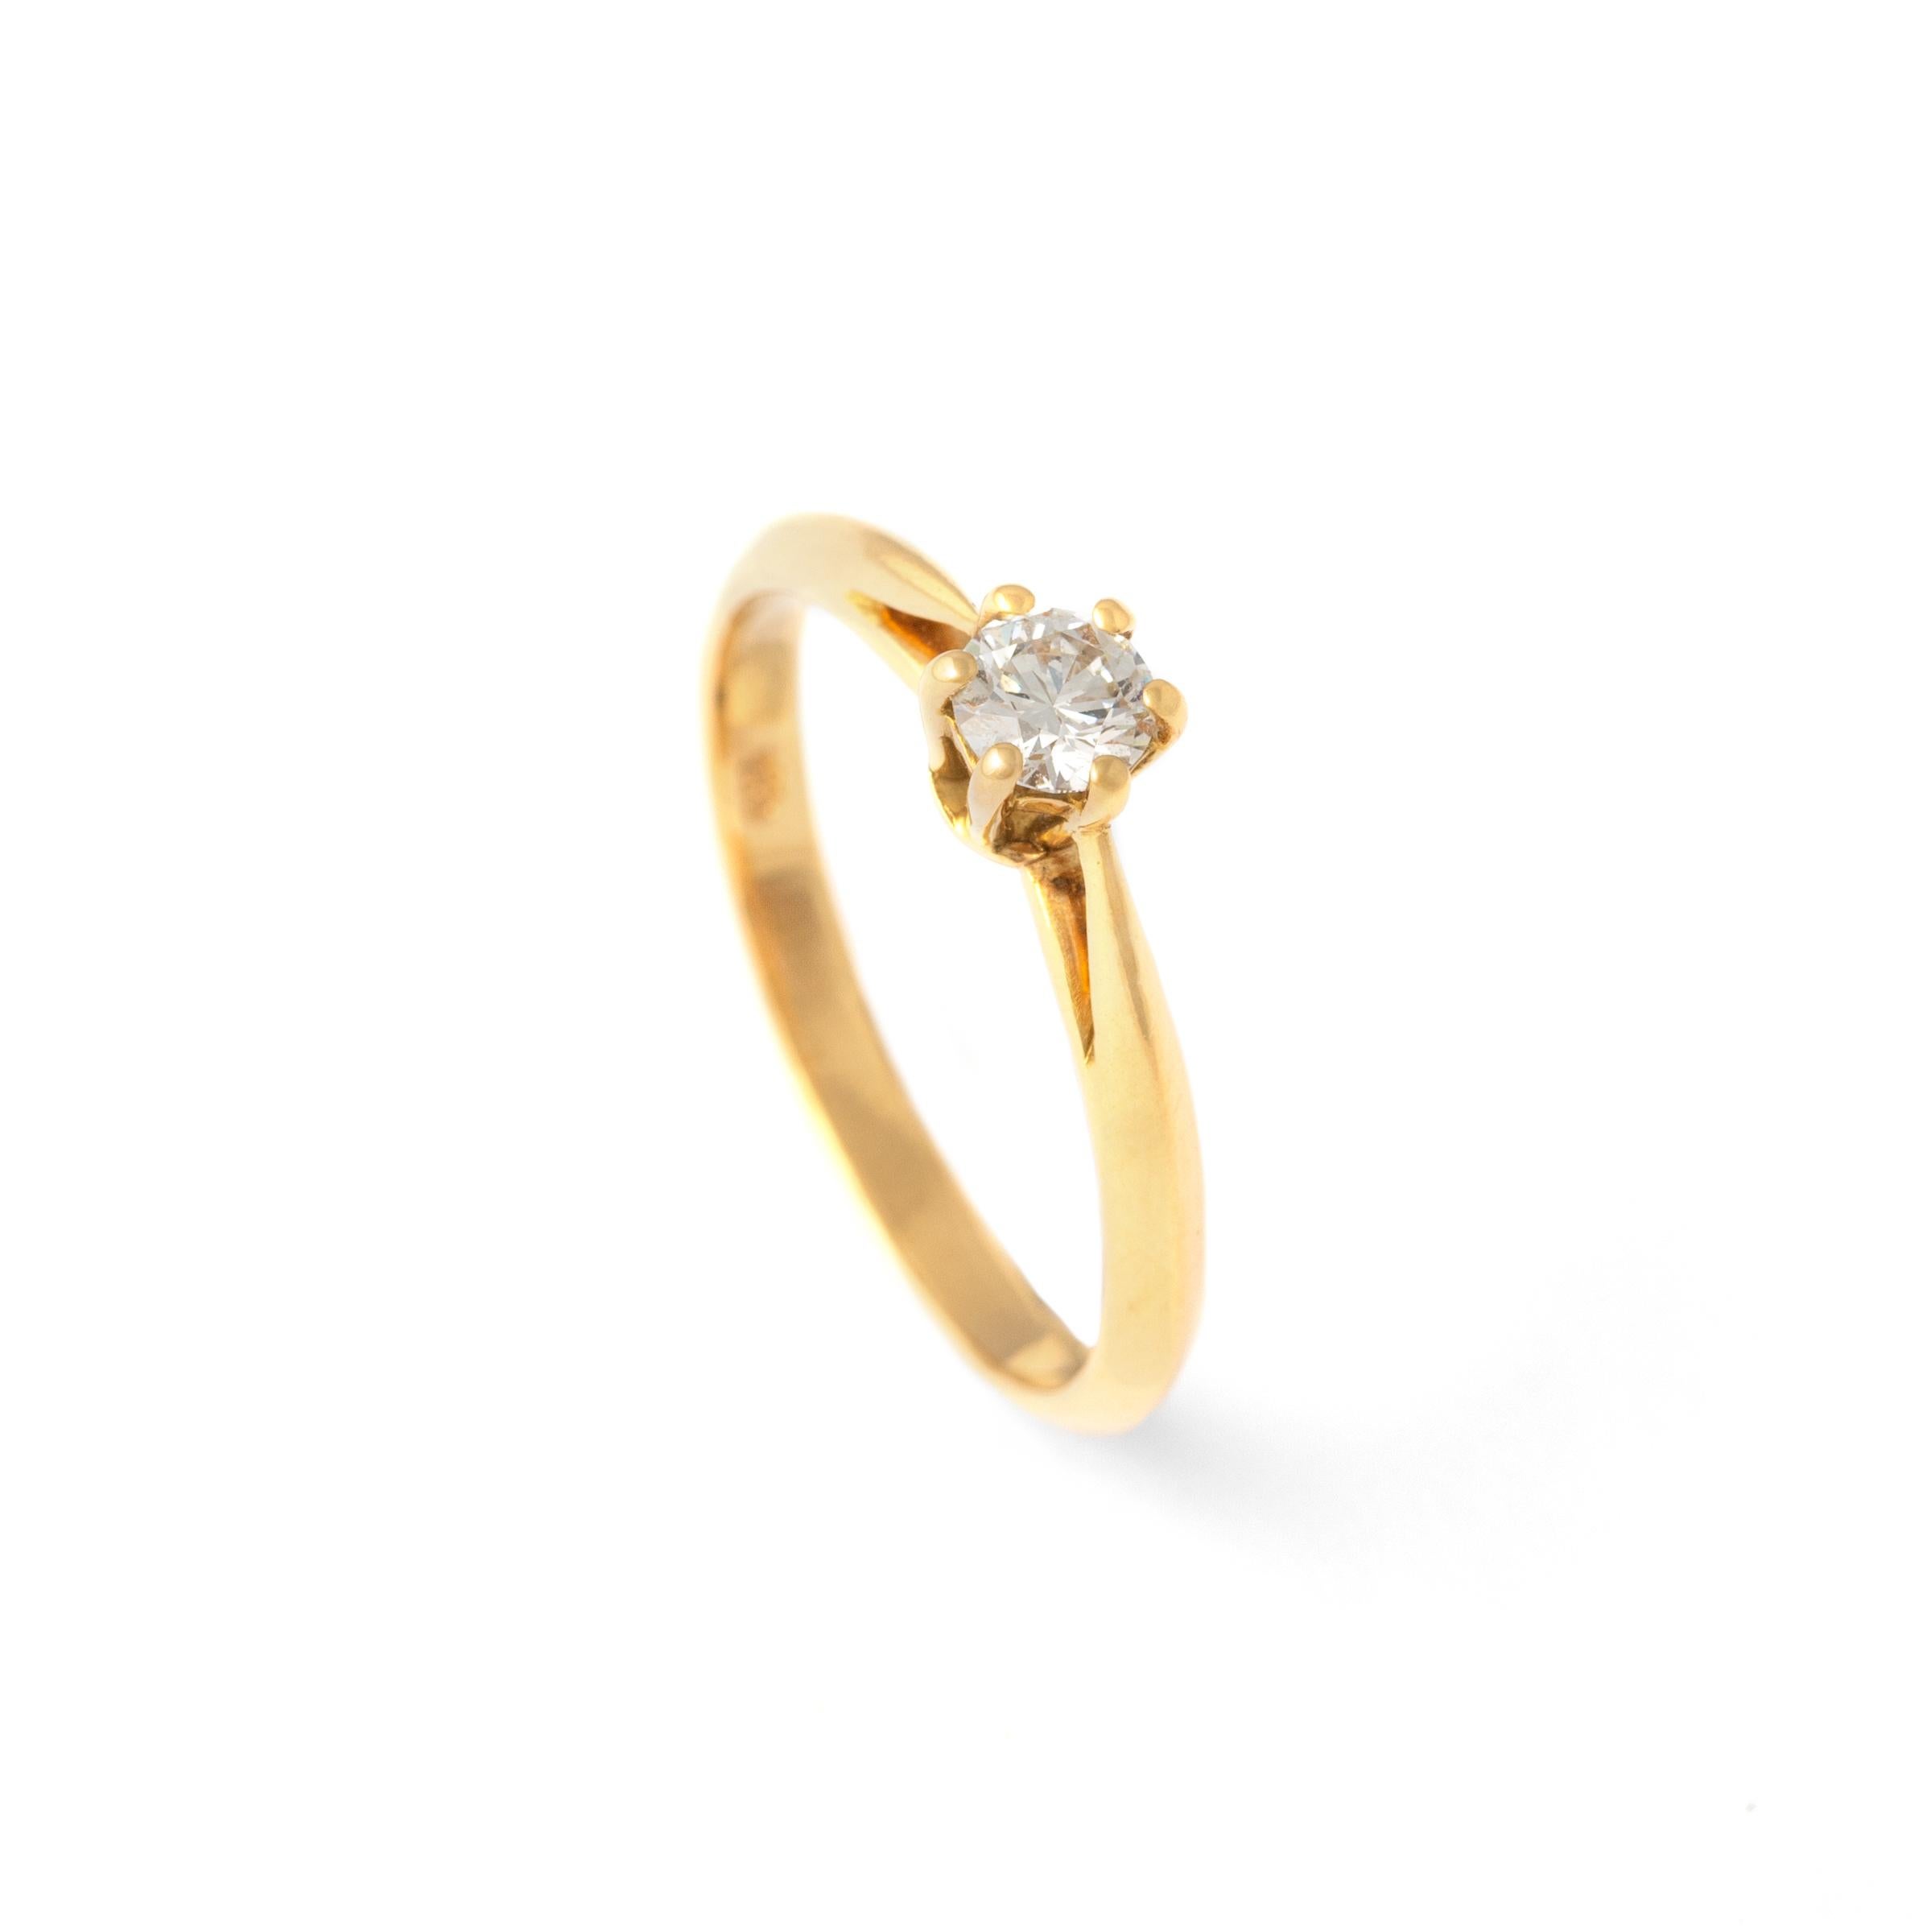 Diamond Yellow Gold 18K Ring
Centered by a round cut diamond of 0,24 carat estimated G color and VVS2 clarity .
Total gross weight; 2.32 grams.
Size: 6

